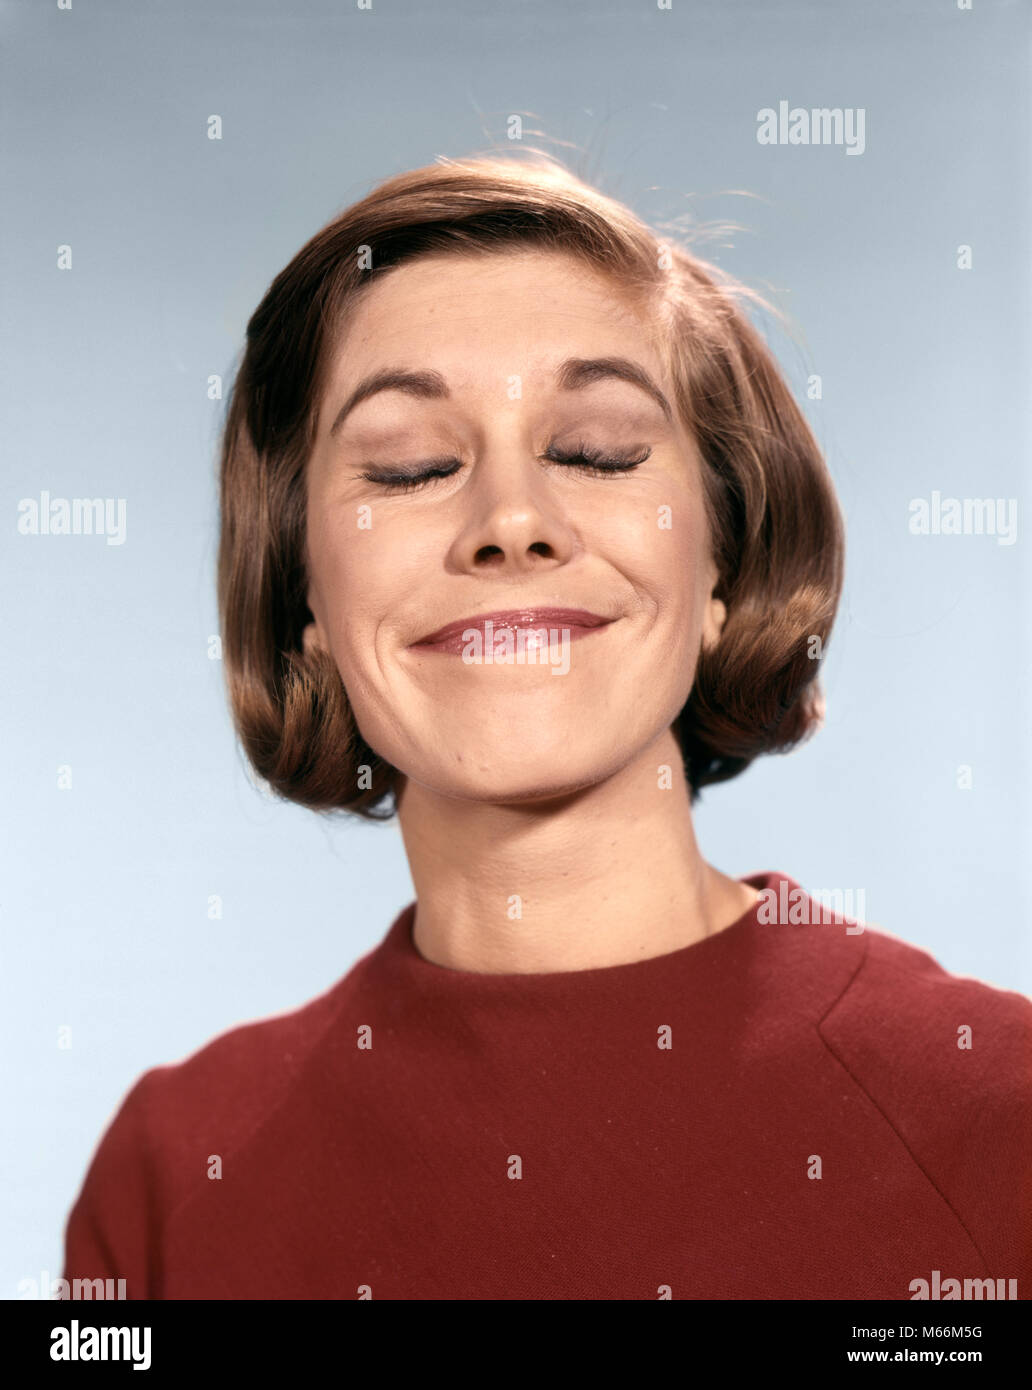 1960s PORTRAIT OF YOUNG WOMAN IN SWEATER WITH SMUG SMILE PLEASED AND HAPPY EXPRESSION - kg2441 HAR001 HARS GROWN-UP INDOORS CONFIDENCE NOSTALGIA SMUG 20-25 YEARS SUCCESS HAPPINESS HEAD AND SHOULDERS CHEERFUL CUSTOMER SERVICE PRIDE FEELING SMILES JOYFUL EMOTION EMOTIONAL EMOTIONS FACIAL EXPRESSION PEOPLE ADULTS SELF SATISFIED YOUNG ADULT WOMAN CAUCASIAN ETHNICITY EXPRESSIVE INDIVIDUAL OLD FASHIONED PERSONS SELF-ACTUALIZATION VICTOR Stock Photo